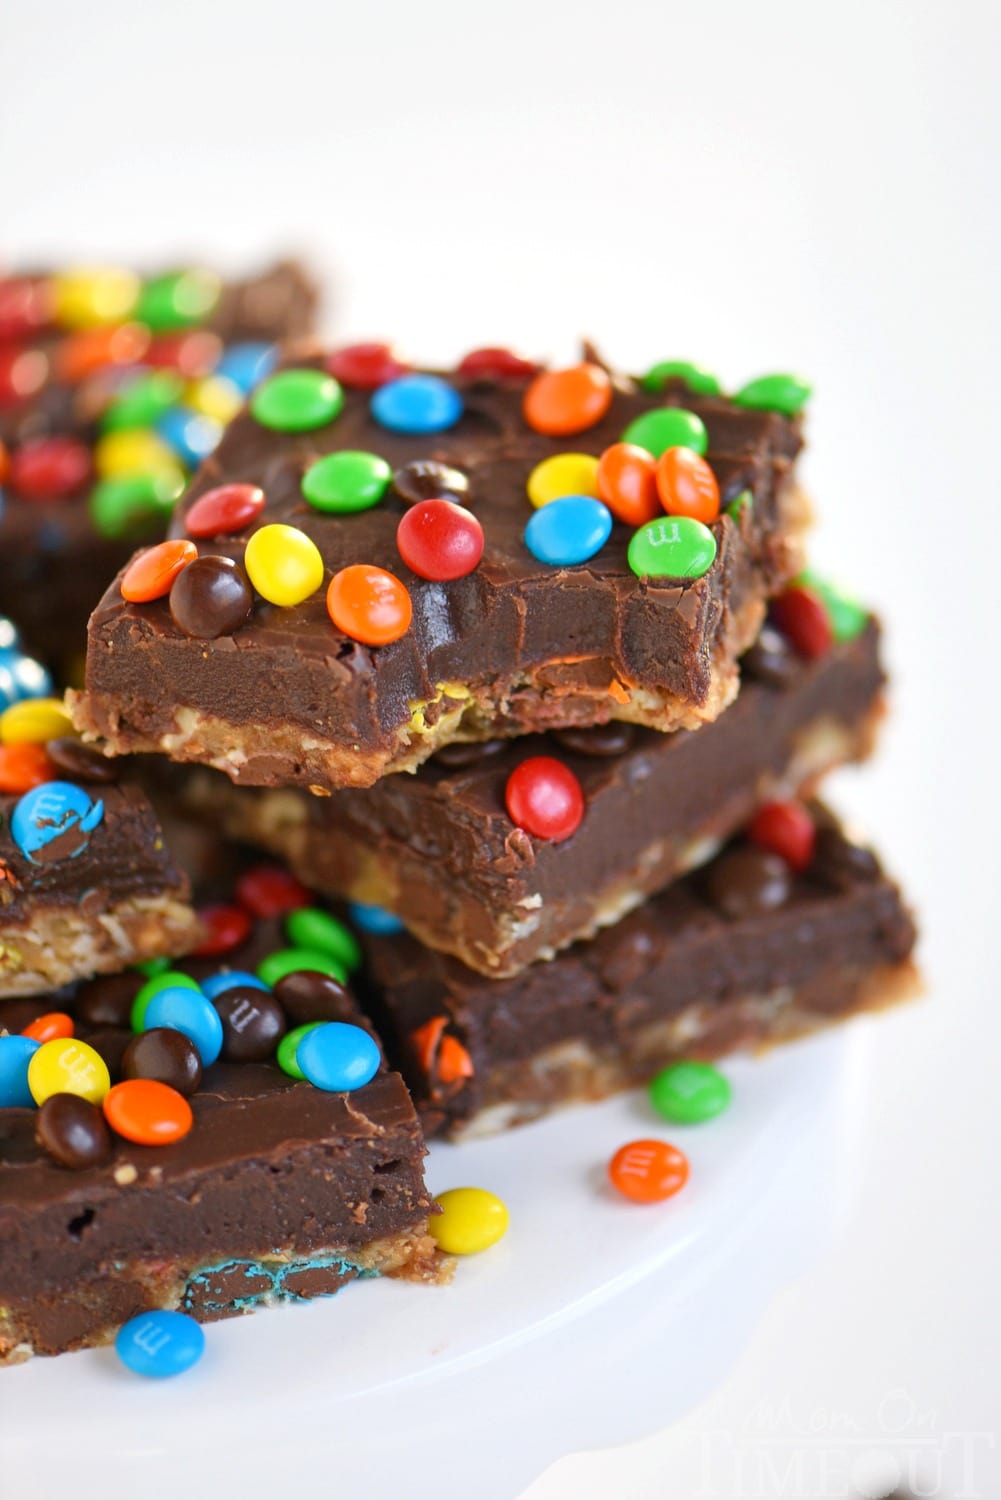 No one can resist these EASY Monster Fudge Bars! Oatmeal chocolate chip cookie bars topped with easy fudge and mini M&M's! This is one decadent treat!